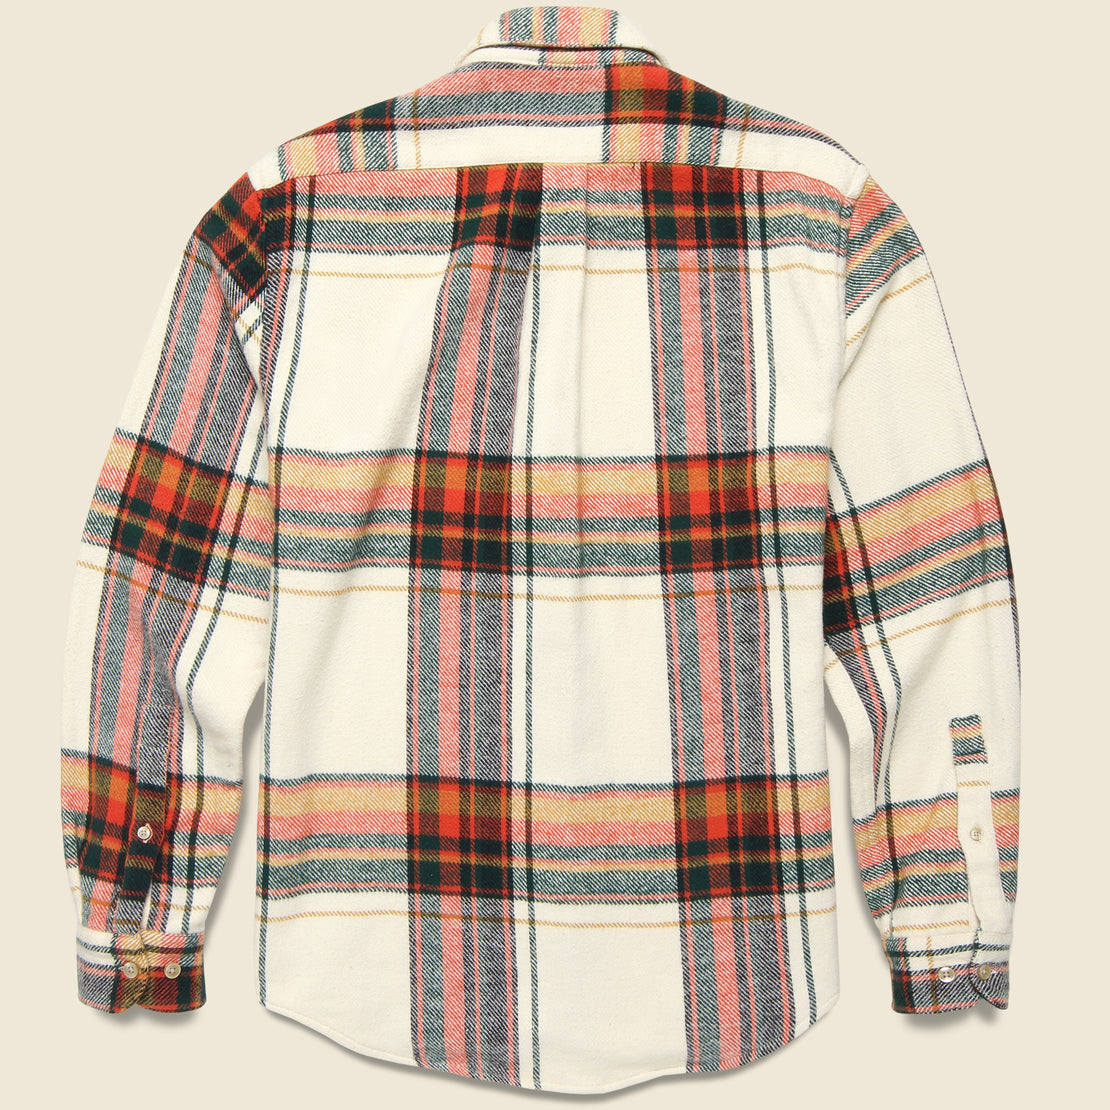 Nords Shirt - White/Red/Green